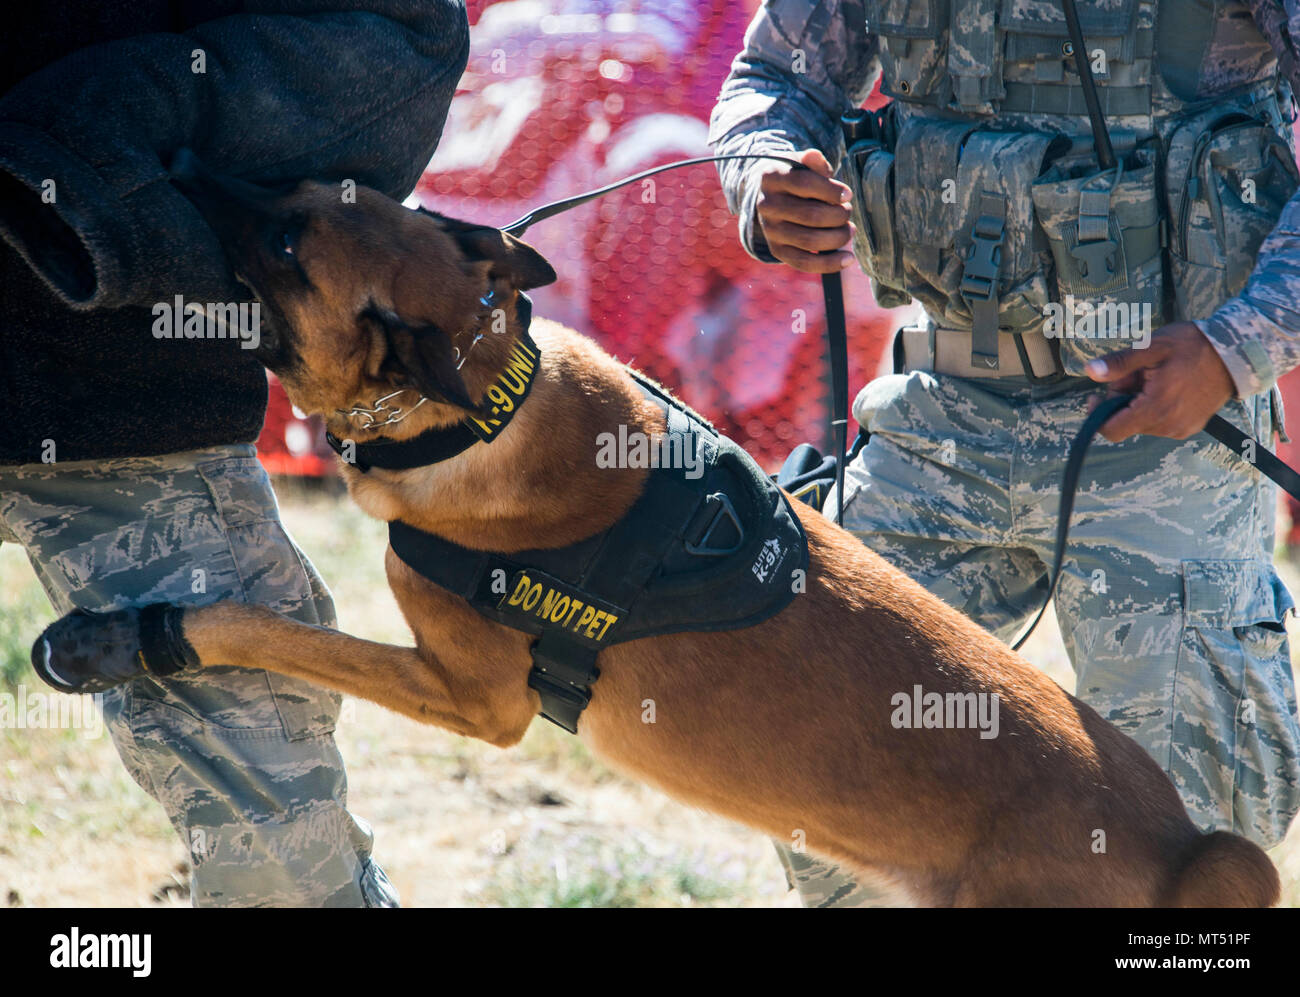 Uutah, 92nd Security Forces Squadron military working dog, lunges at an Airman during a K-9 demonstration at SkyFest 2017 Air Show and Open House at Fairchild Air Force Base, Washington, July 30, 2017. SkyFest is Fairchild’s air show and open house to give the local and regional community the opportunity to meet Airmen and learn about the Air Force mission. (U.S. Air Force photo/Senior Airman Janelle Patiño) Stock Photo